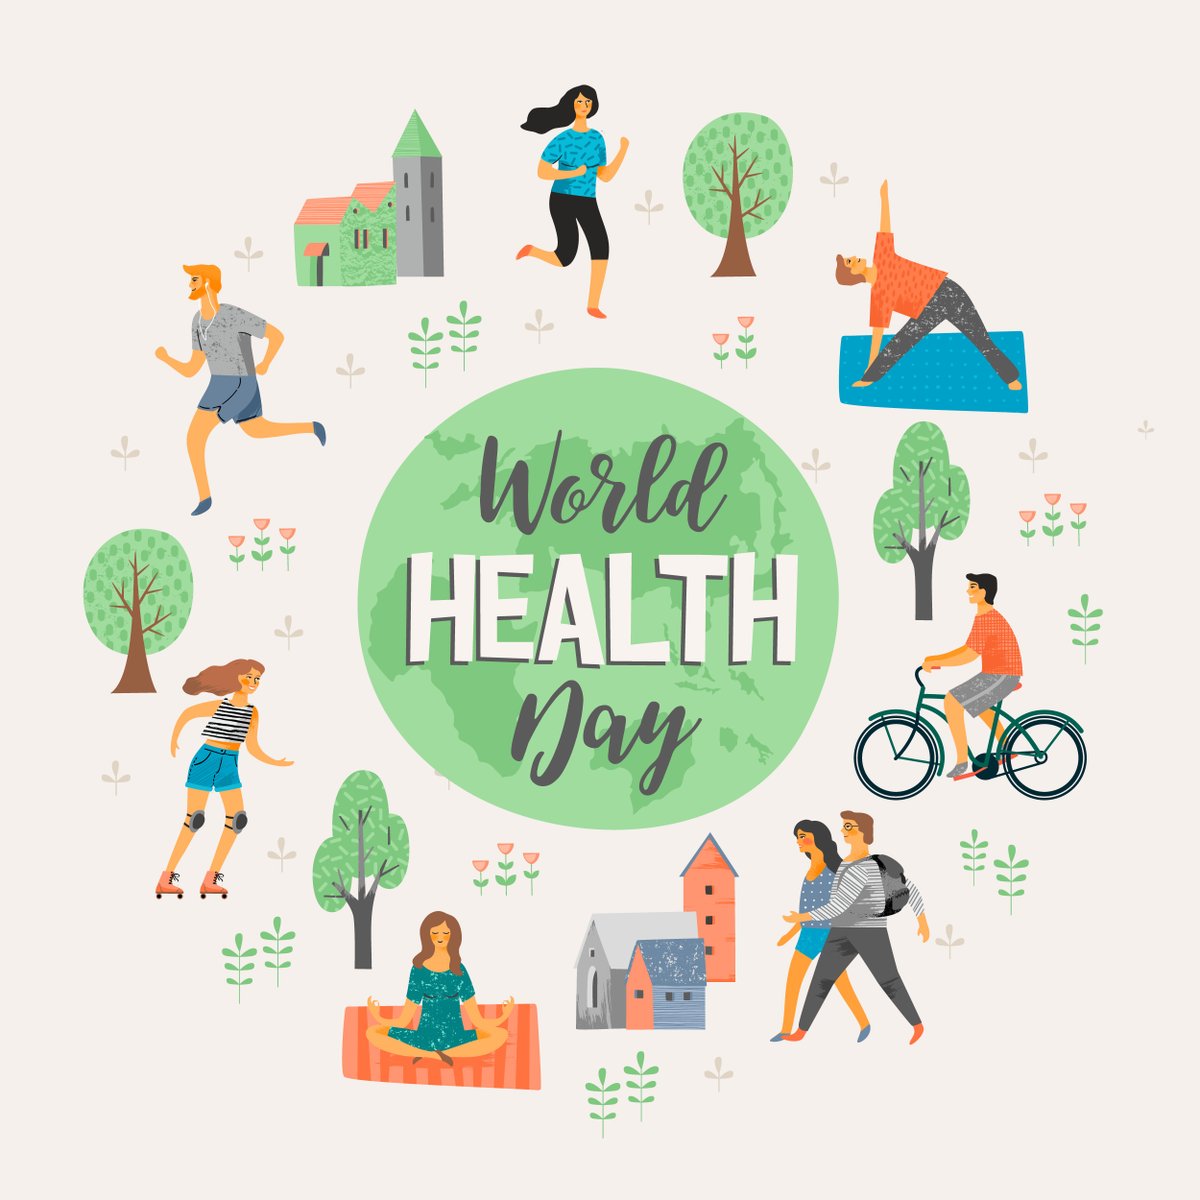 Happy #WorldHealthDay ! This year’s theme #MyHealthMyRight empowers us to prioritize well-being. Tips:
1. Self-care: Exercise, eat well, sleep.
2. Advocate: Know your health rights.
3. Access healthcare.
4. Stay informed.
5. Support others. 
Your health matters! #IPHQatar @WHO